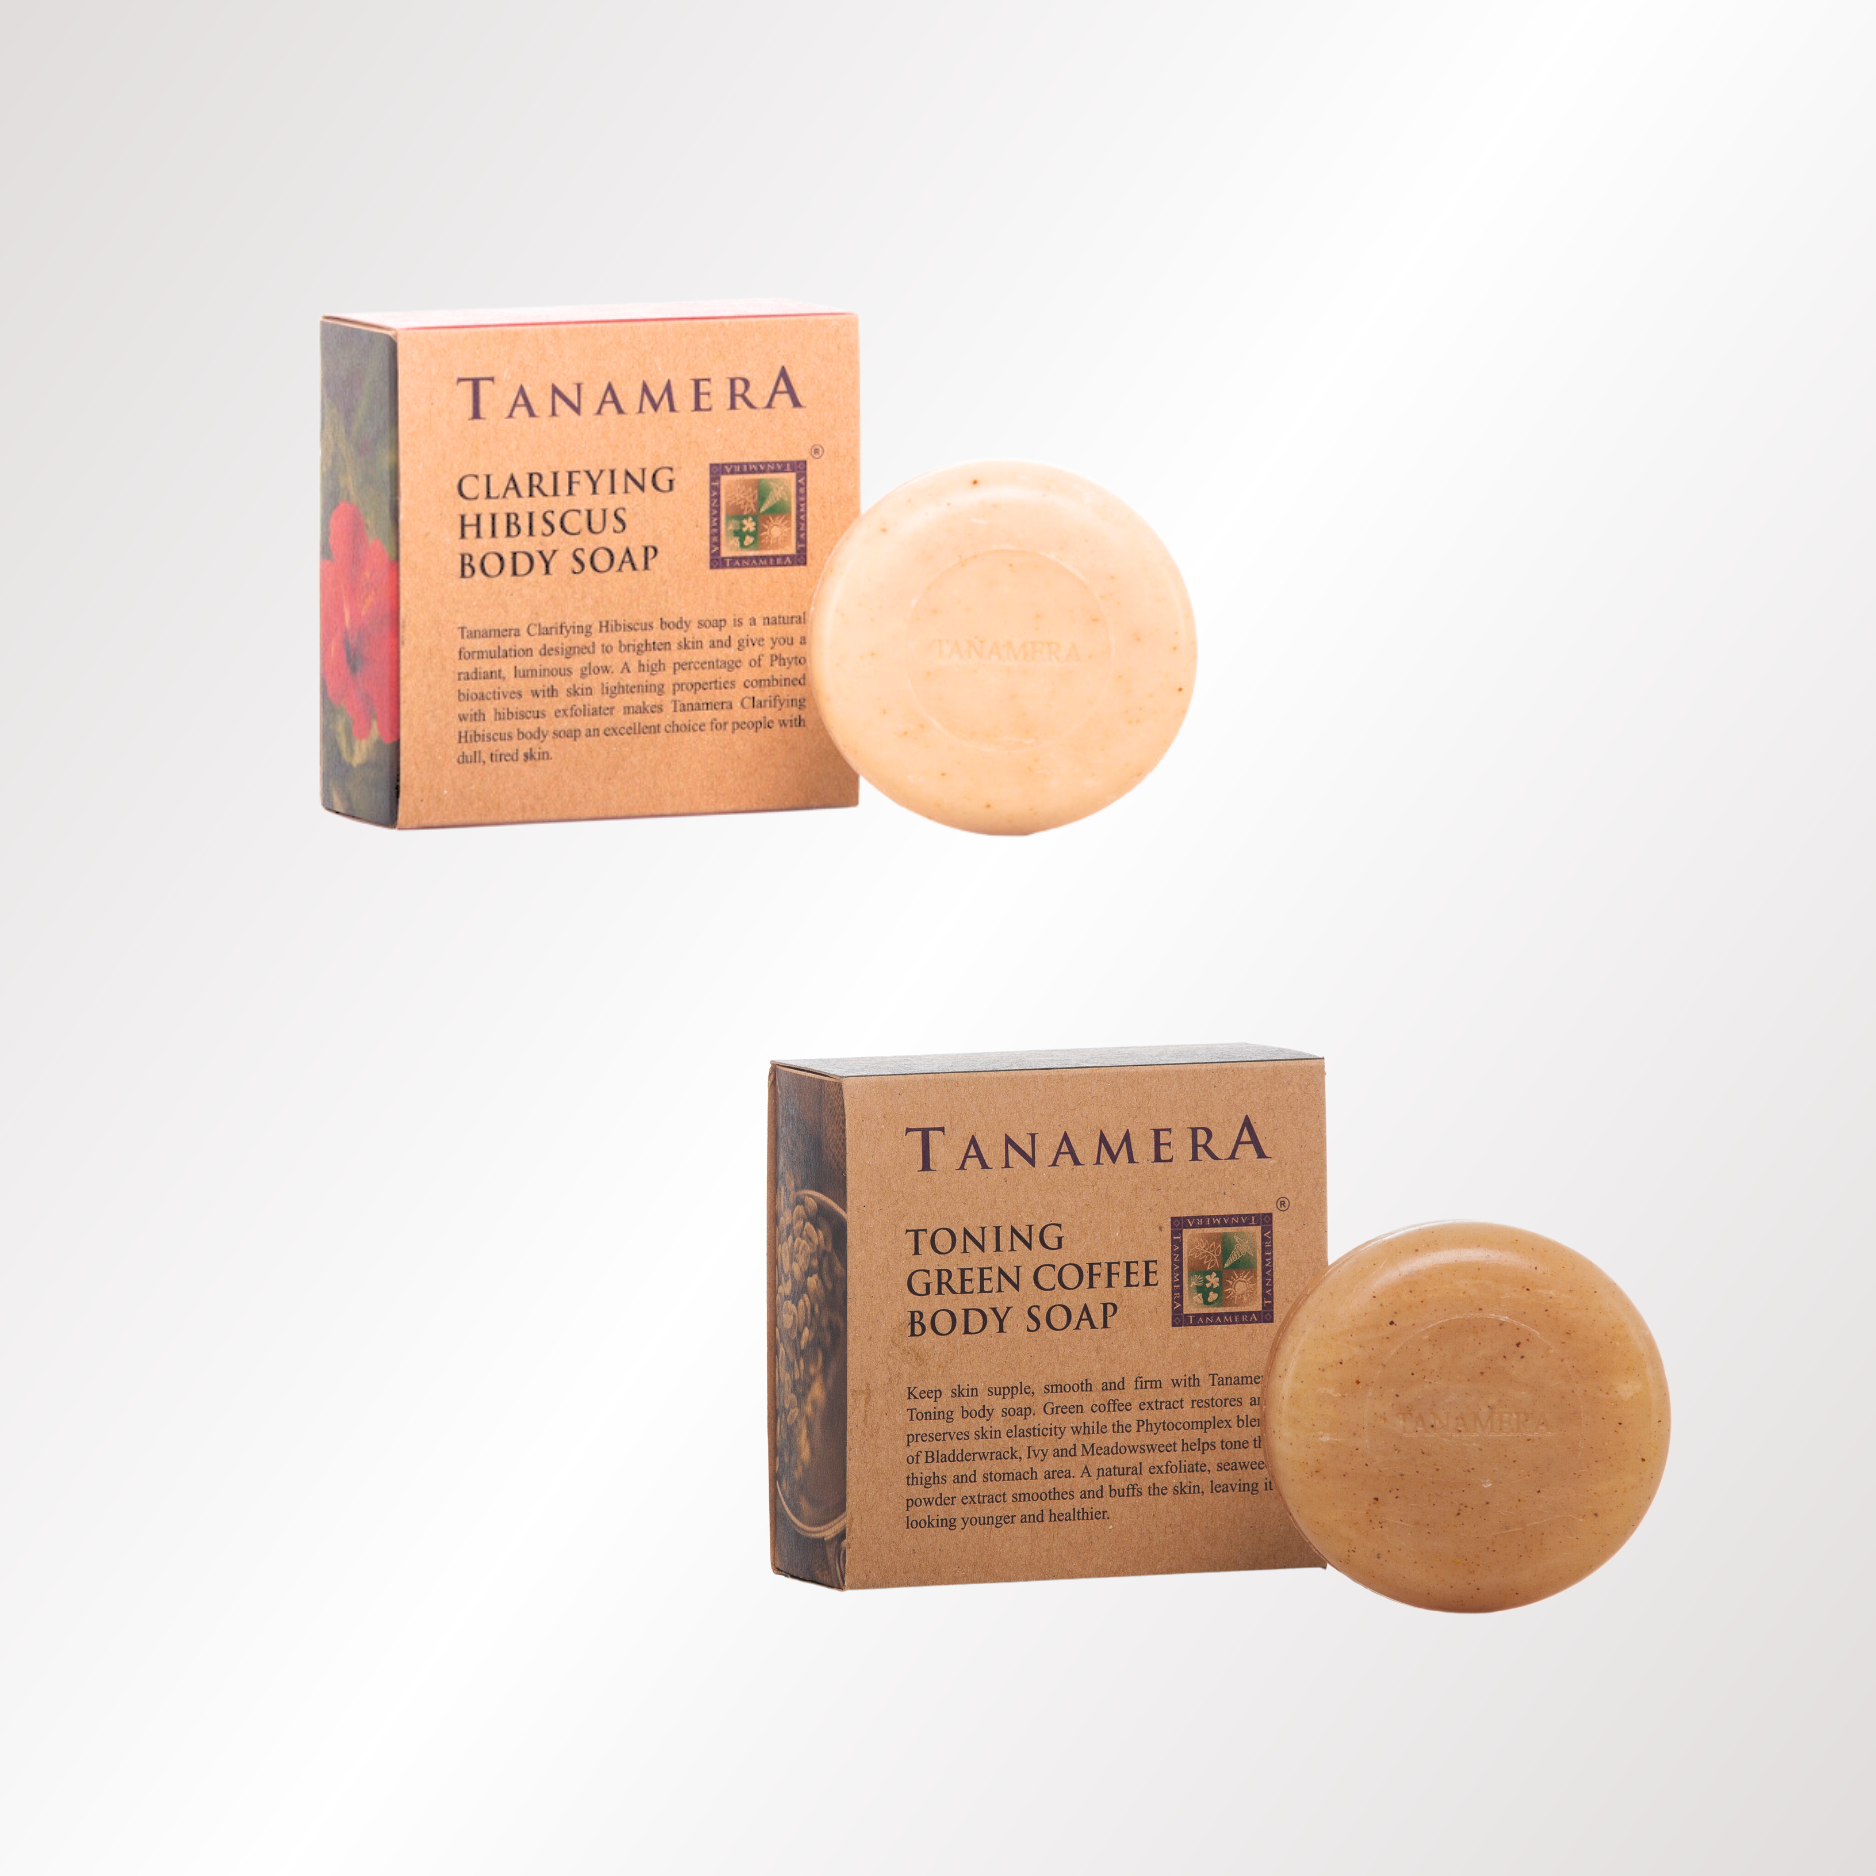 Tanamera skin care and other products 